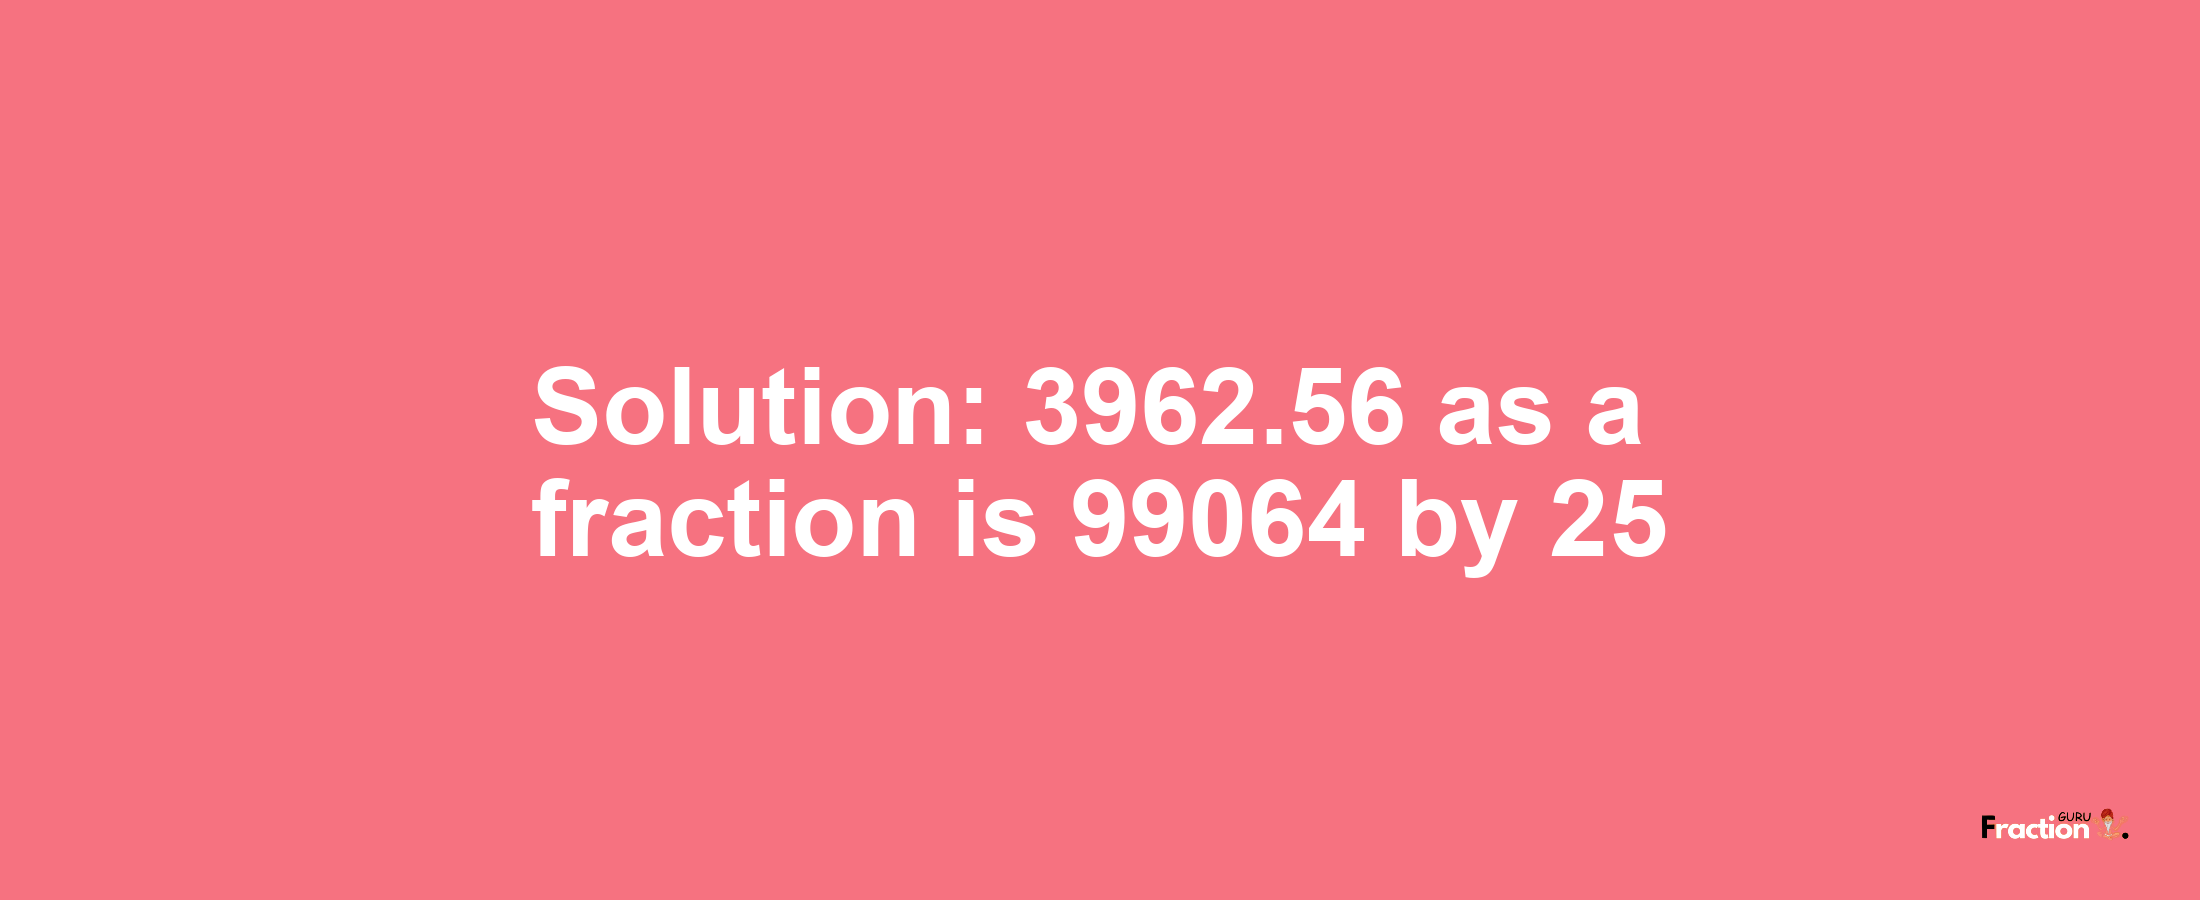 Solution:3962.56 as a fraction is 99064/25